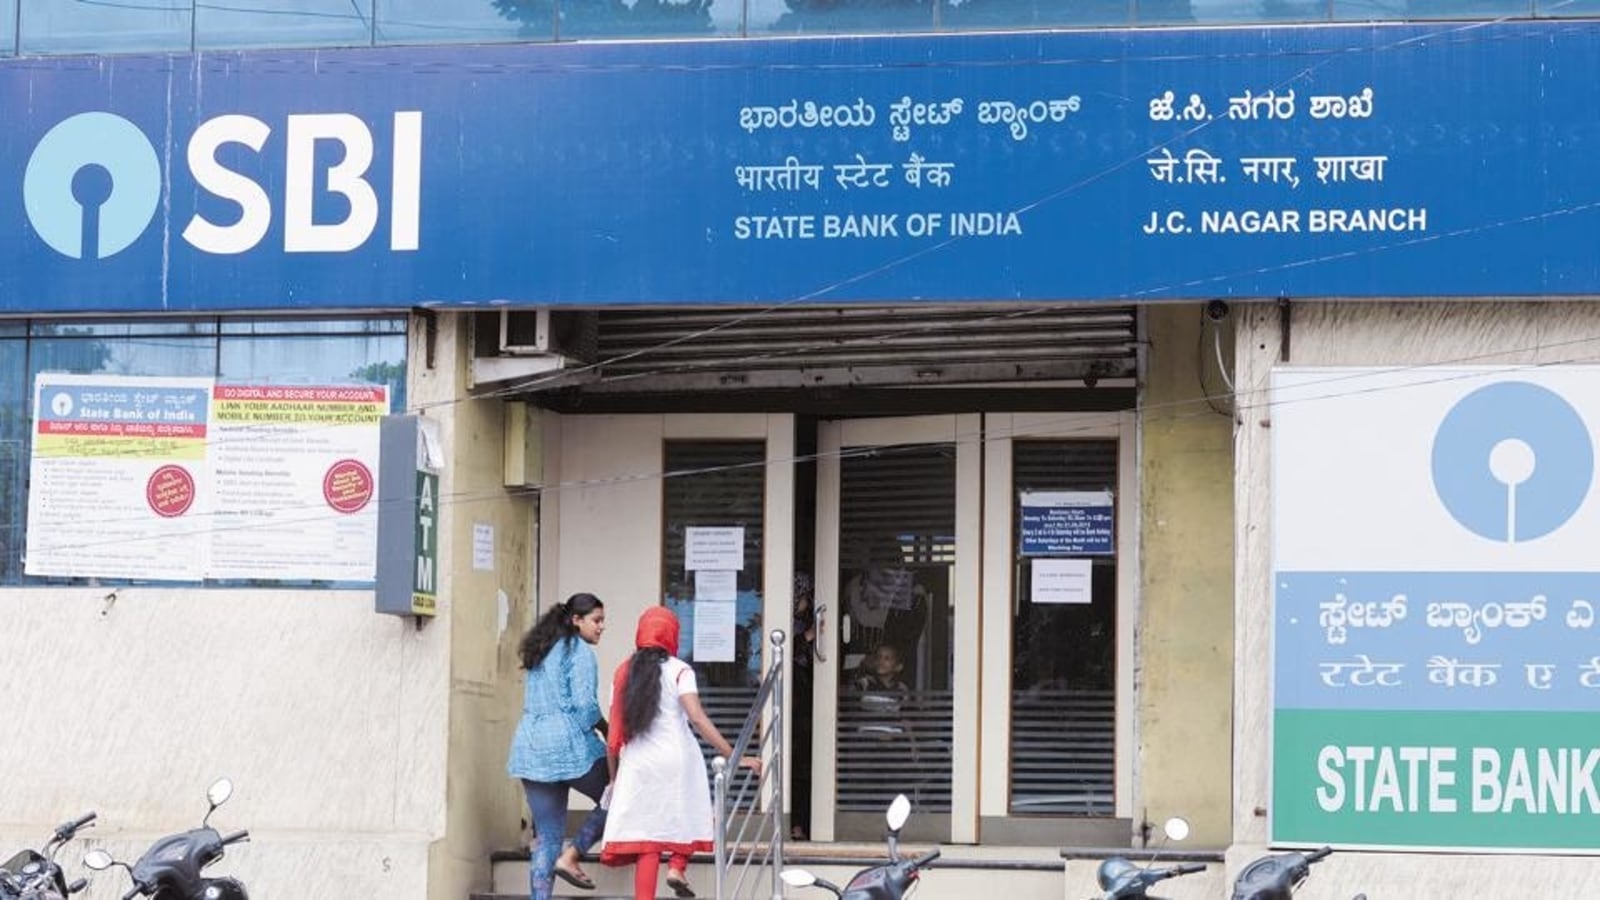 Sbi Online Banking Service To Be Impacted For 120 Minutes On September 15 Hindustan Times 3299